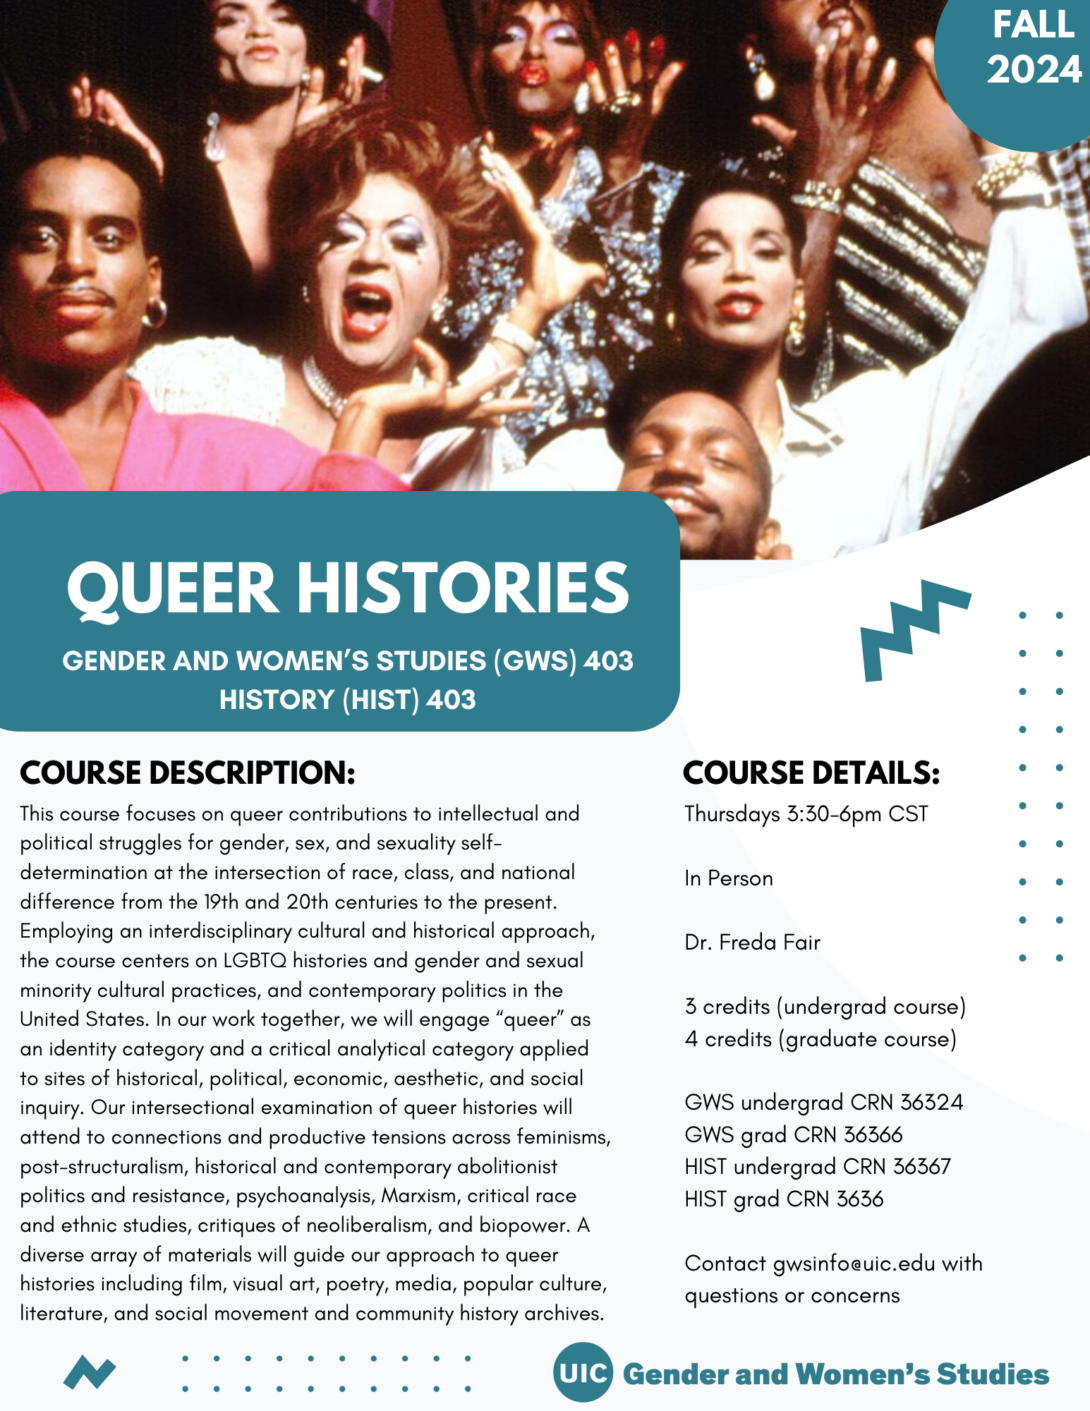 A flyer promoting the fall 2024 Queer Histories course. The top portion of the flyer includes a photo of a group of ball competition contestants from the 1991 documentary 